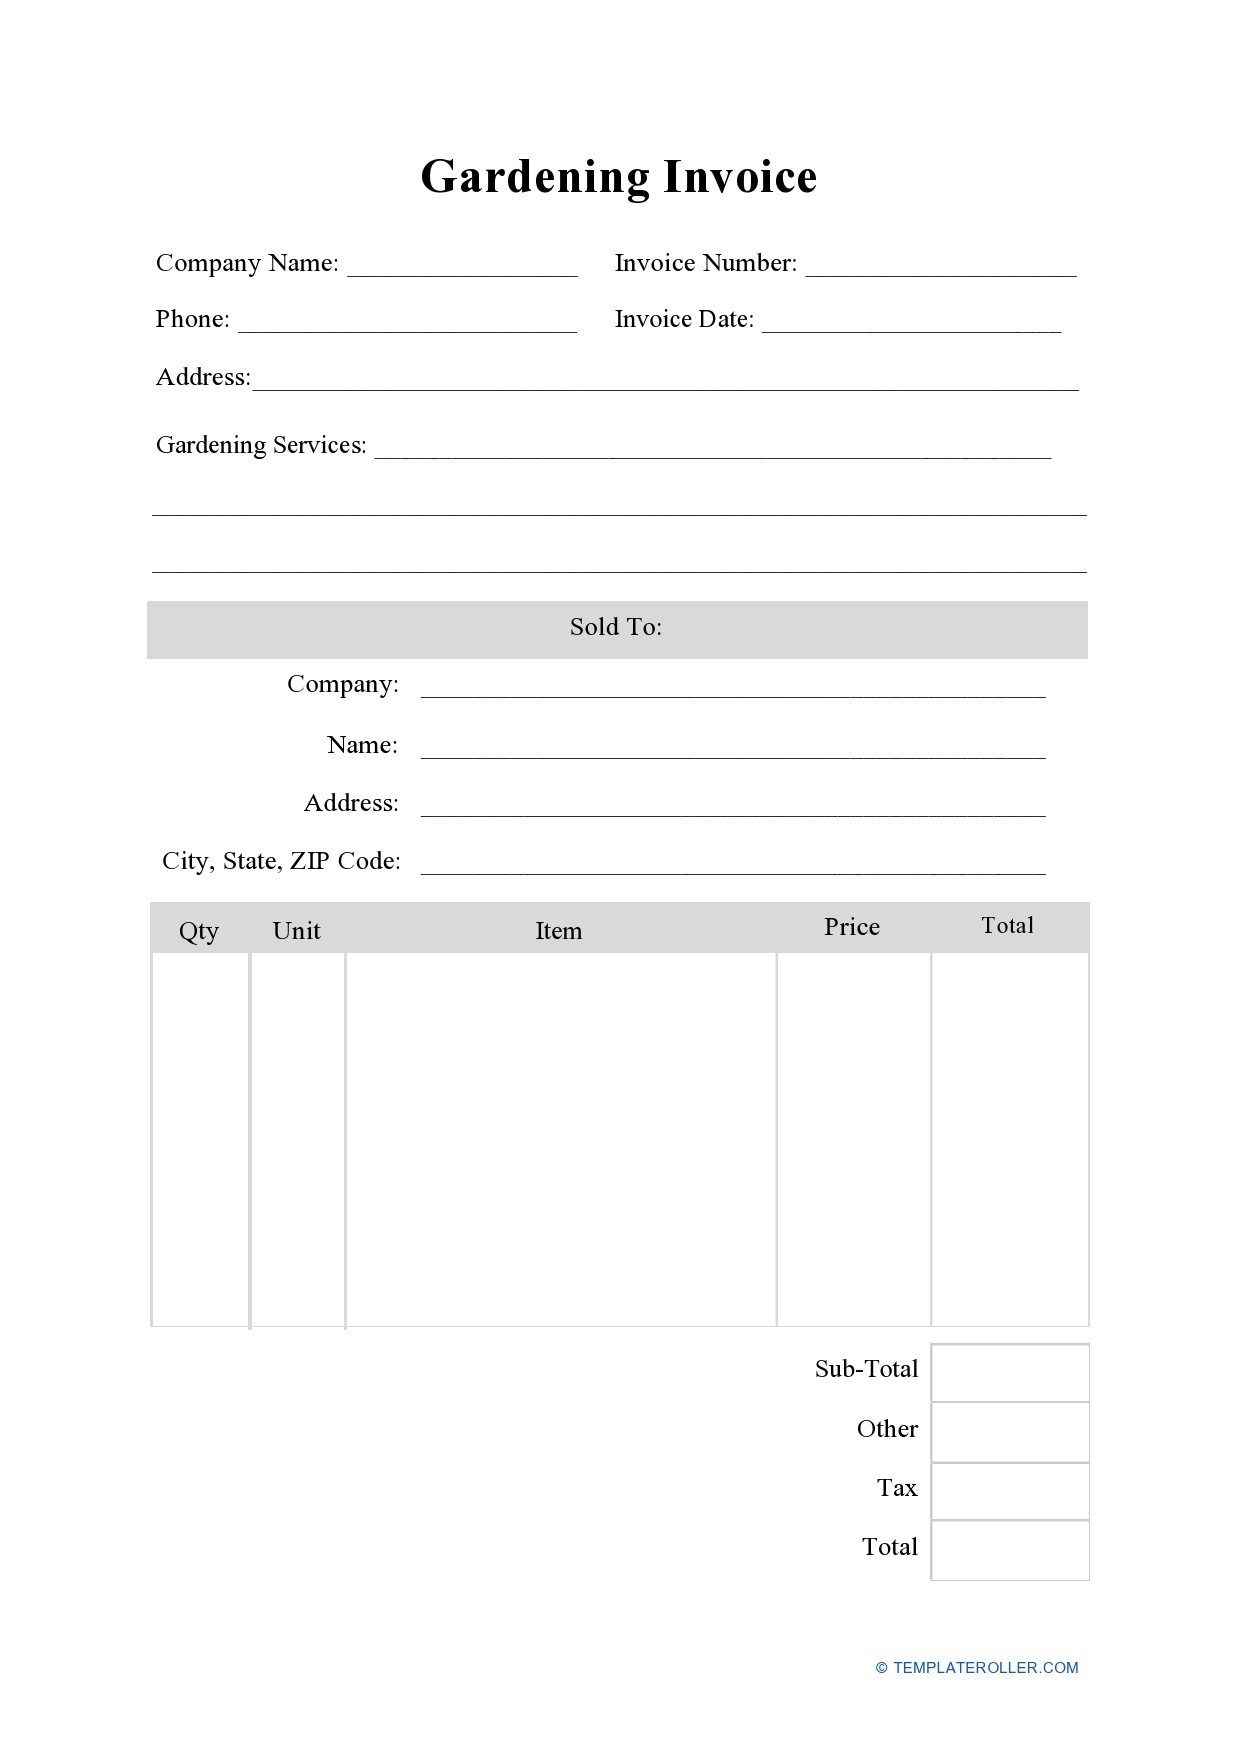 Free landscaping invoice 22